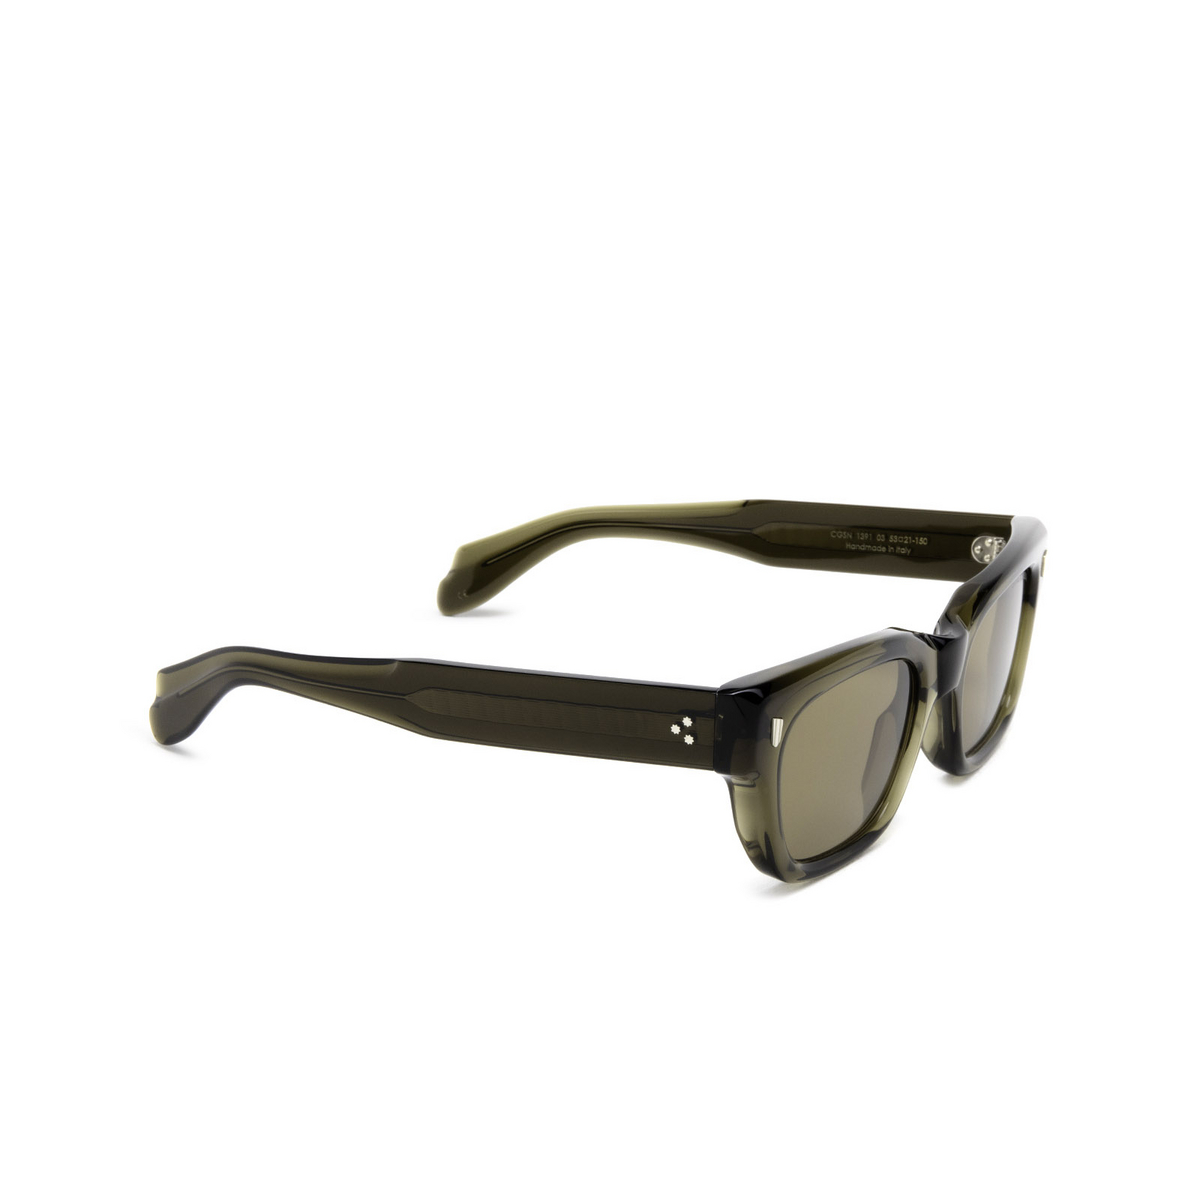 Cutler and Gross 1391 Sunglasses 03 Olive - three-quarters view